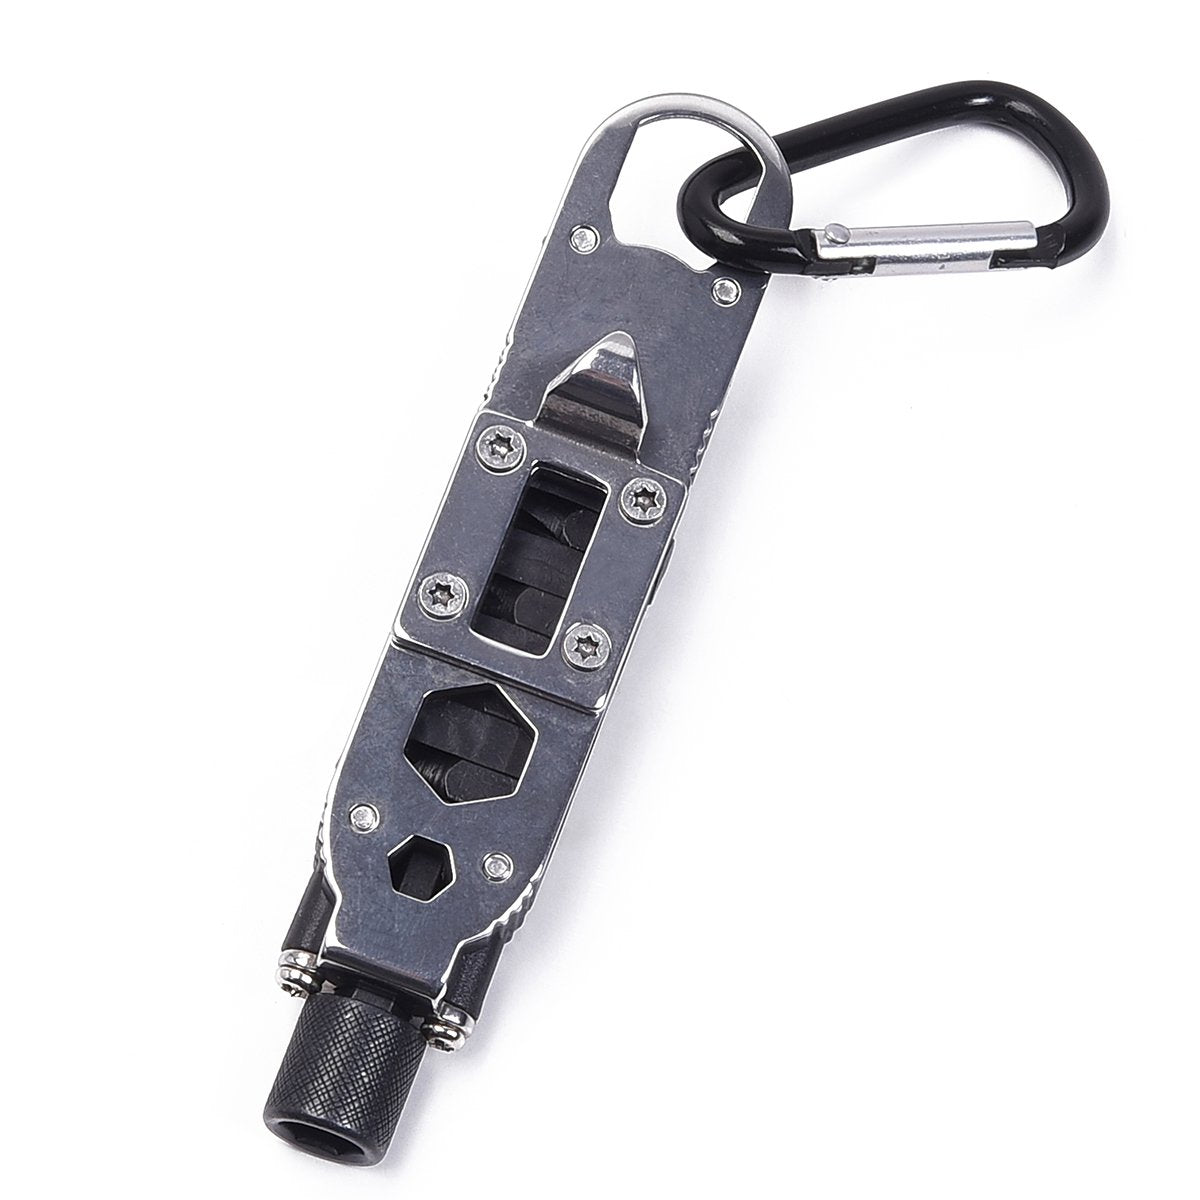 8 Function Tactical Key Chain Tool - Mad Man by Mad Style Wholesale